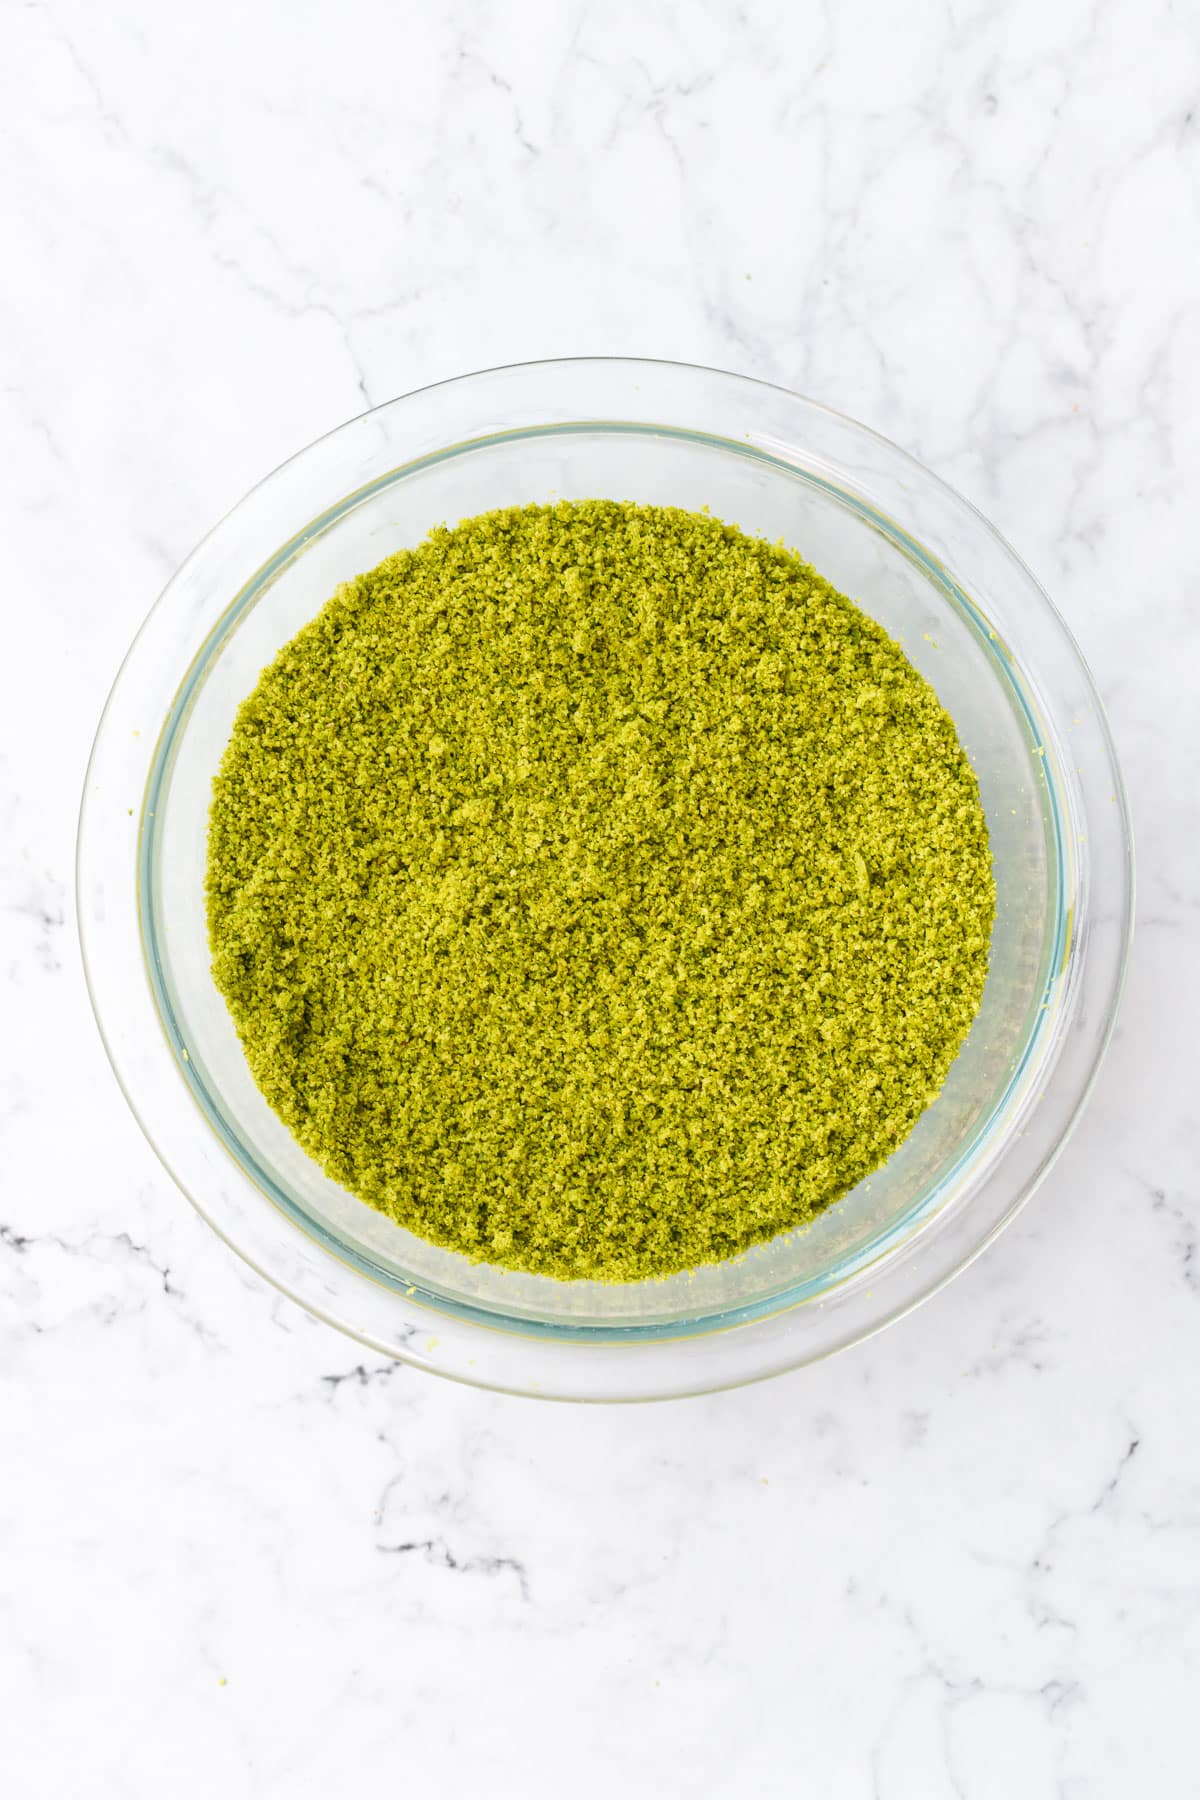 Overhead, bright green Homemade Pistachio Flour in a glass bowl on a marble background.